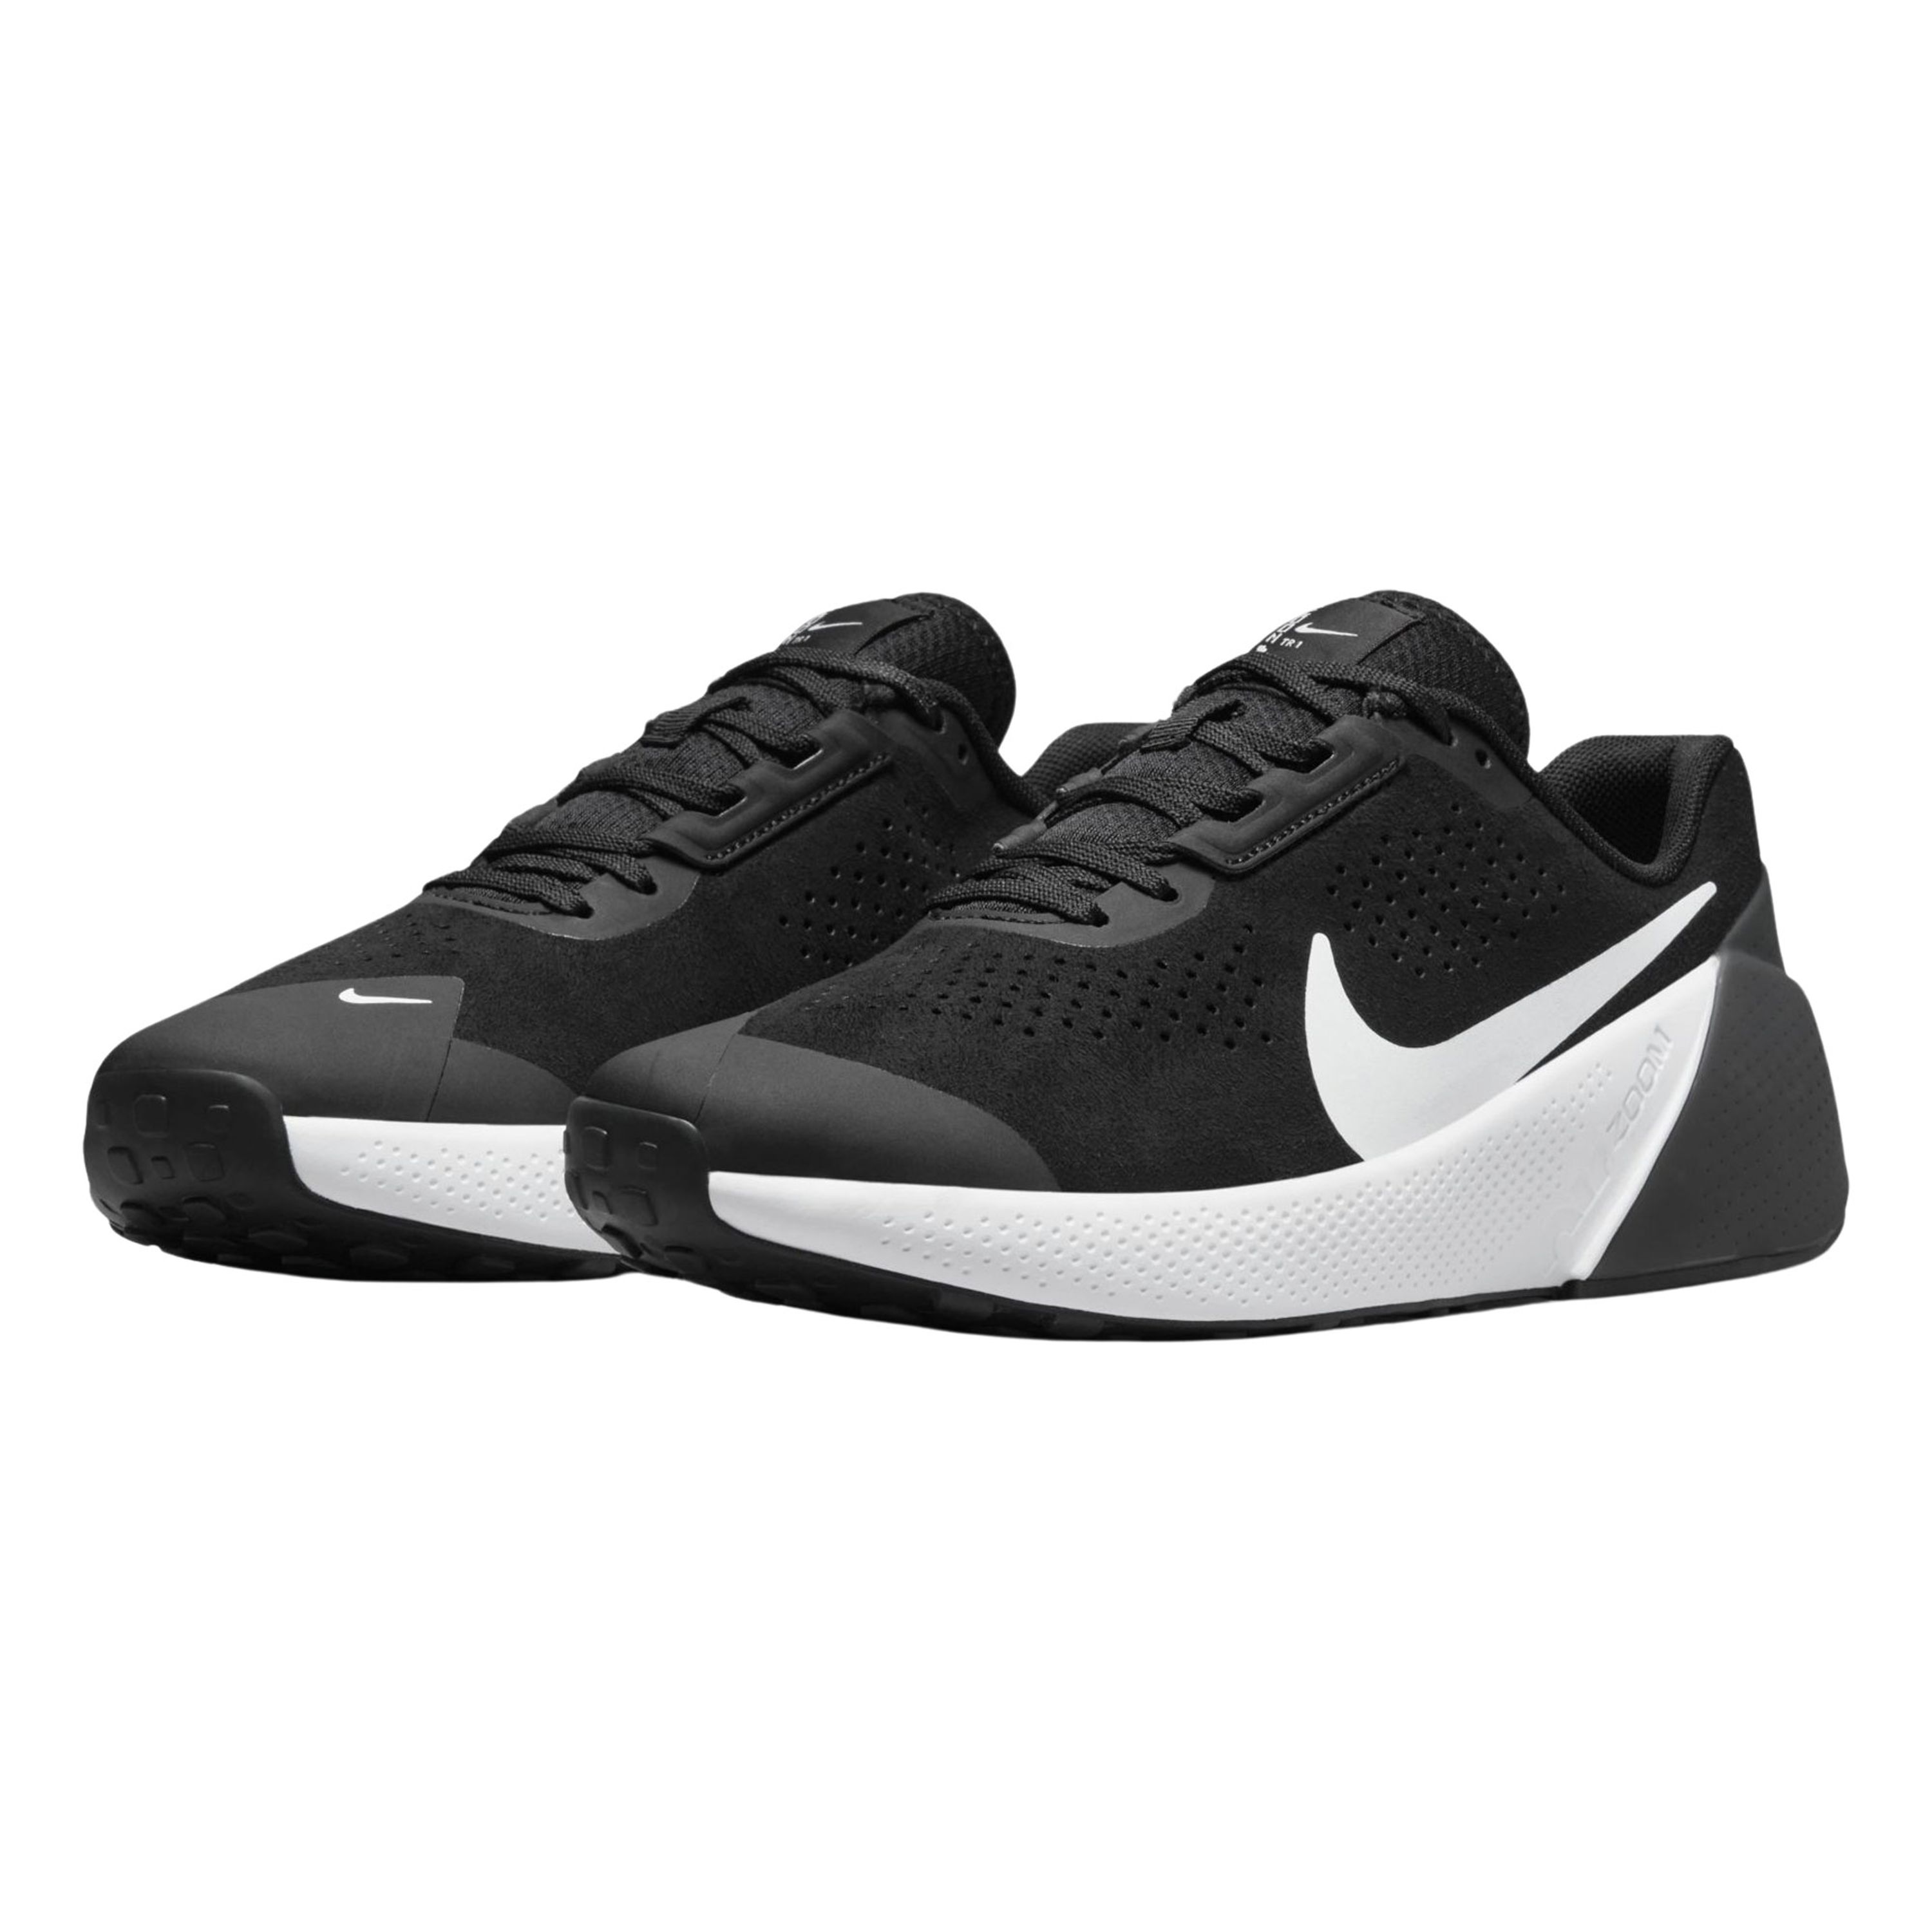 NIKE Air Zoom TR 1 Fitnessschuhe 002 - black/white-anthracite